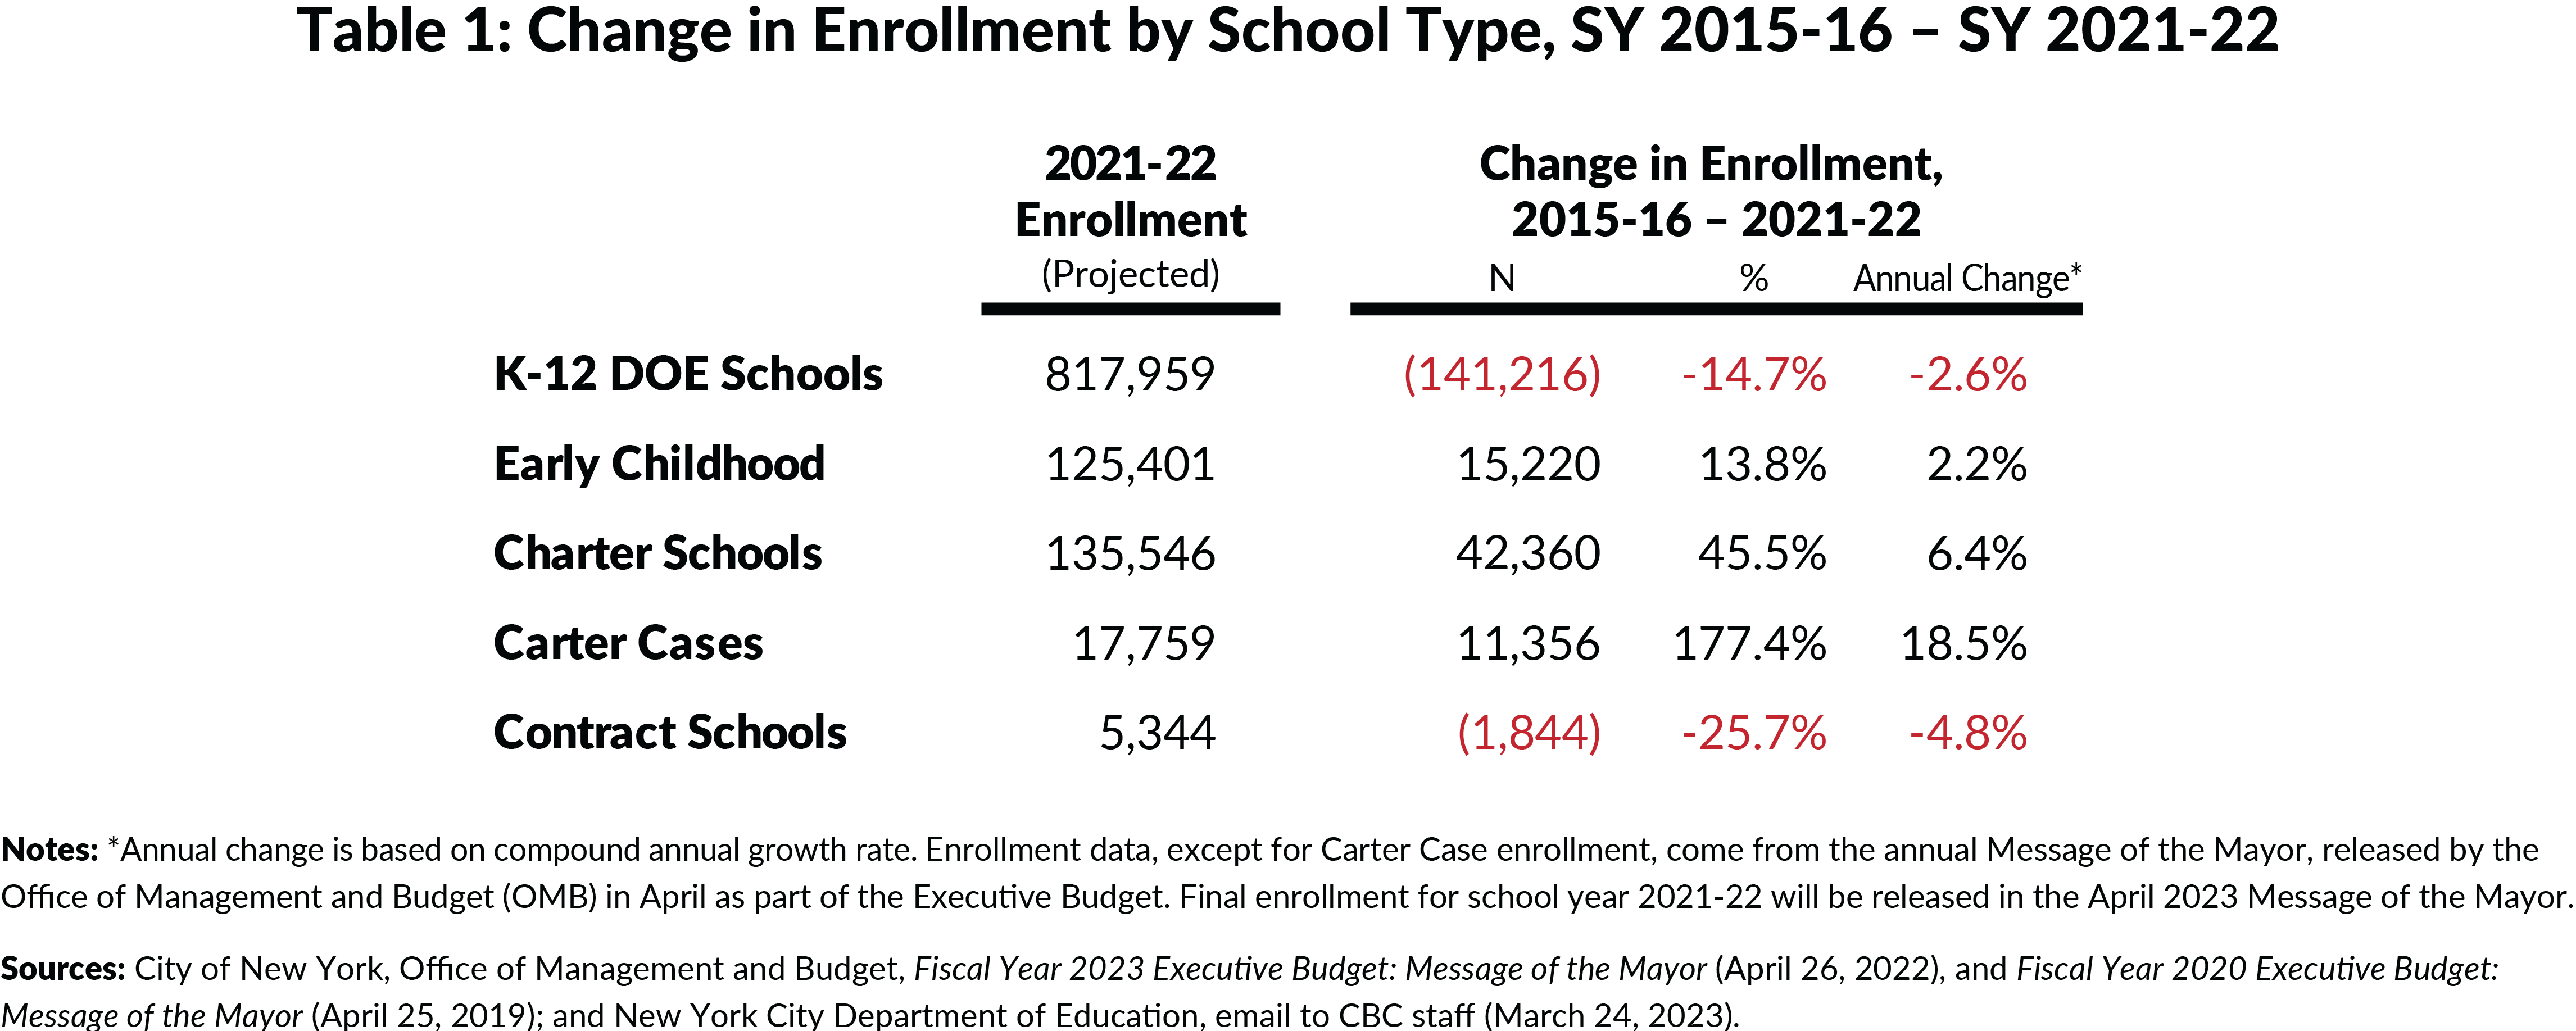 Table 1: Change in Enrollment by School Type, SY 2015-16 – SY 2021-22